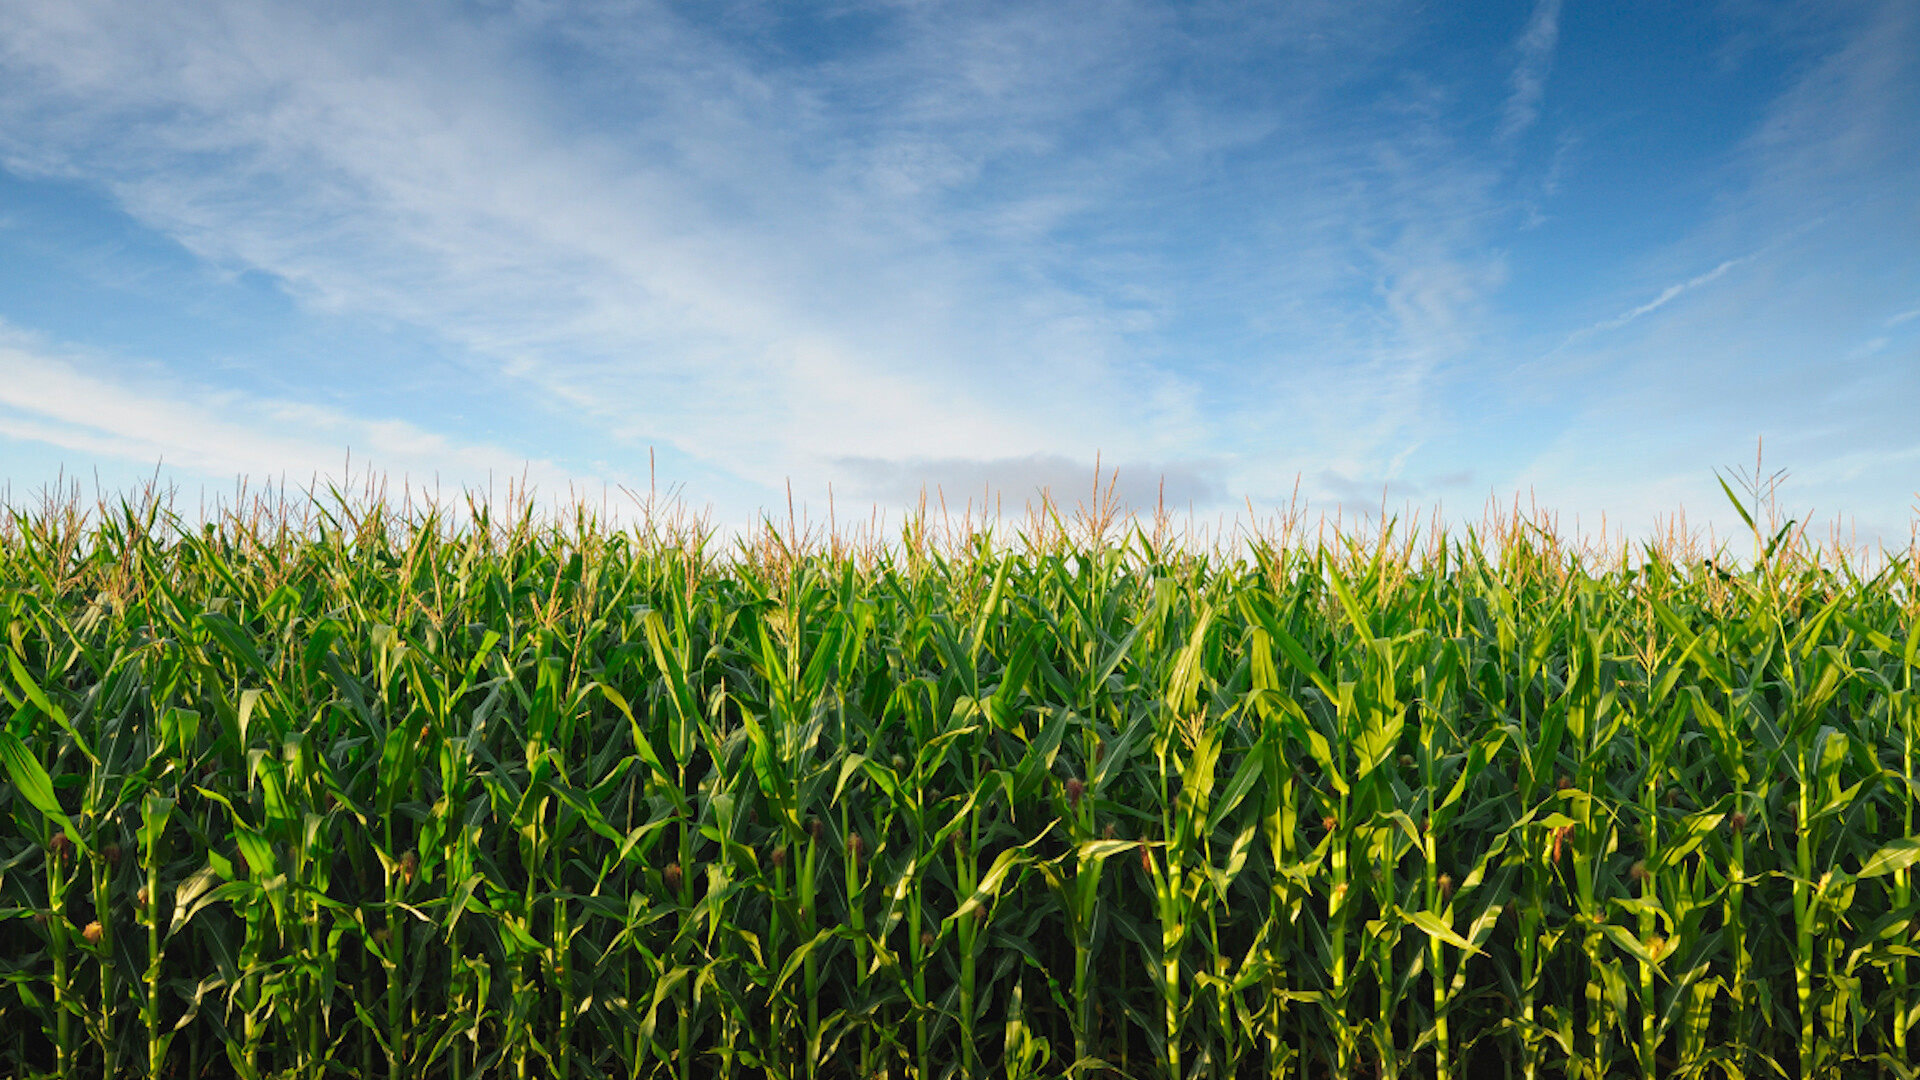 Rising U.S. Corn Yields Boost Production Without Additional Land